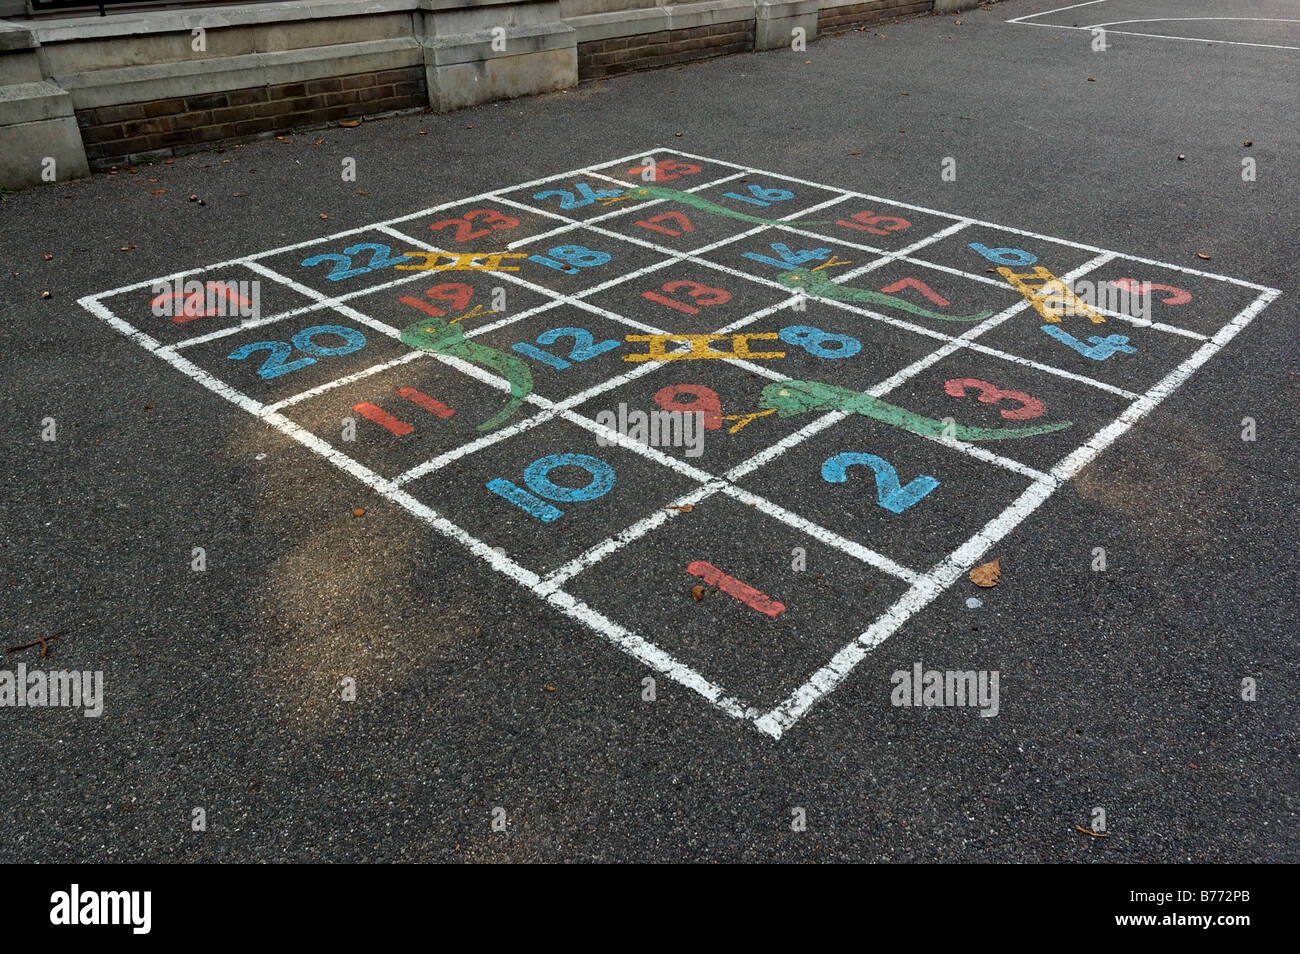 Snakes And Ladders Playground Stock Photos Snakes And Ladders